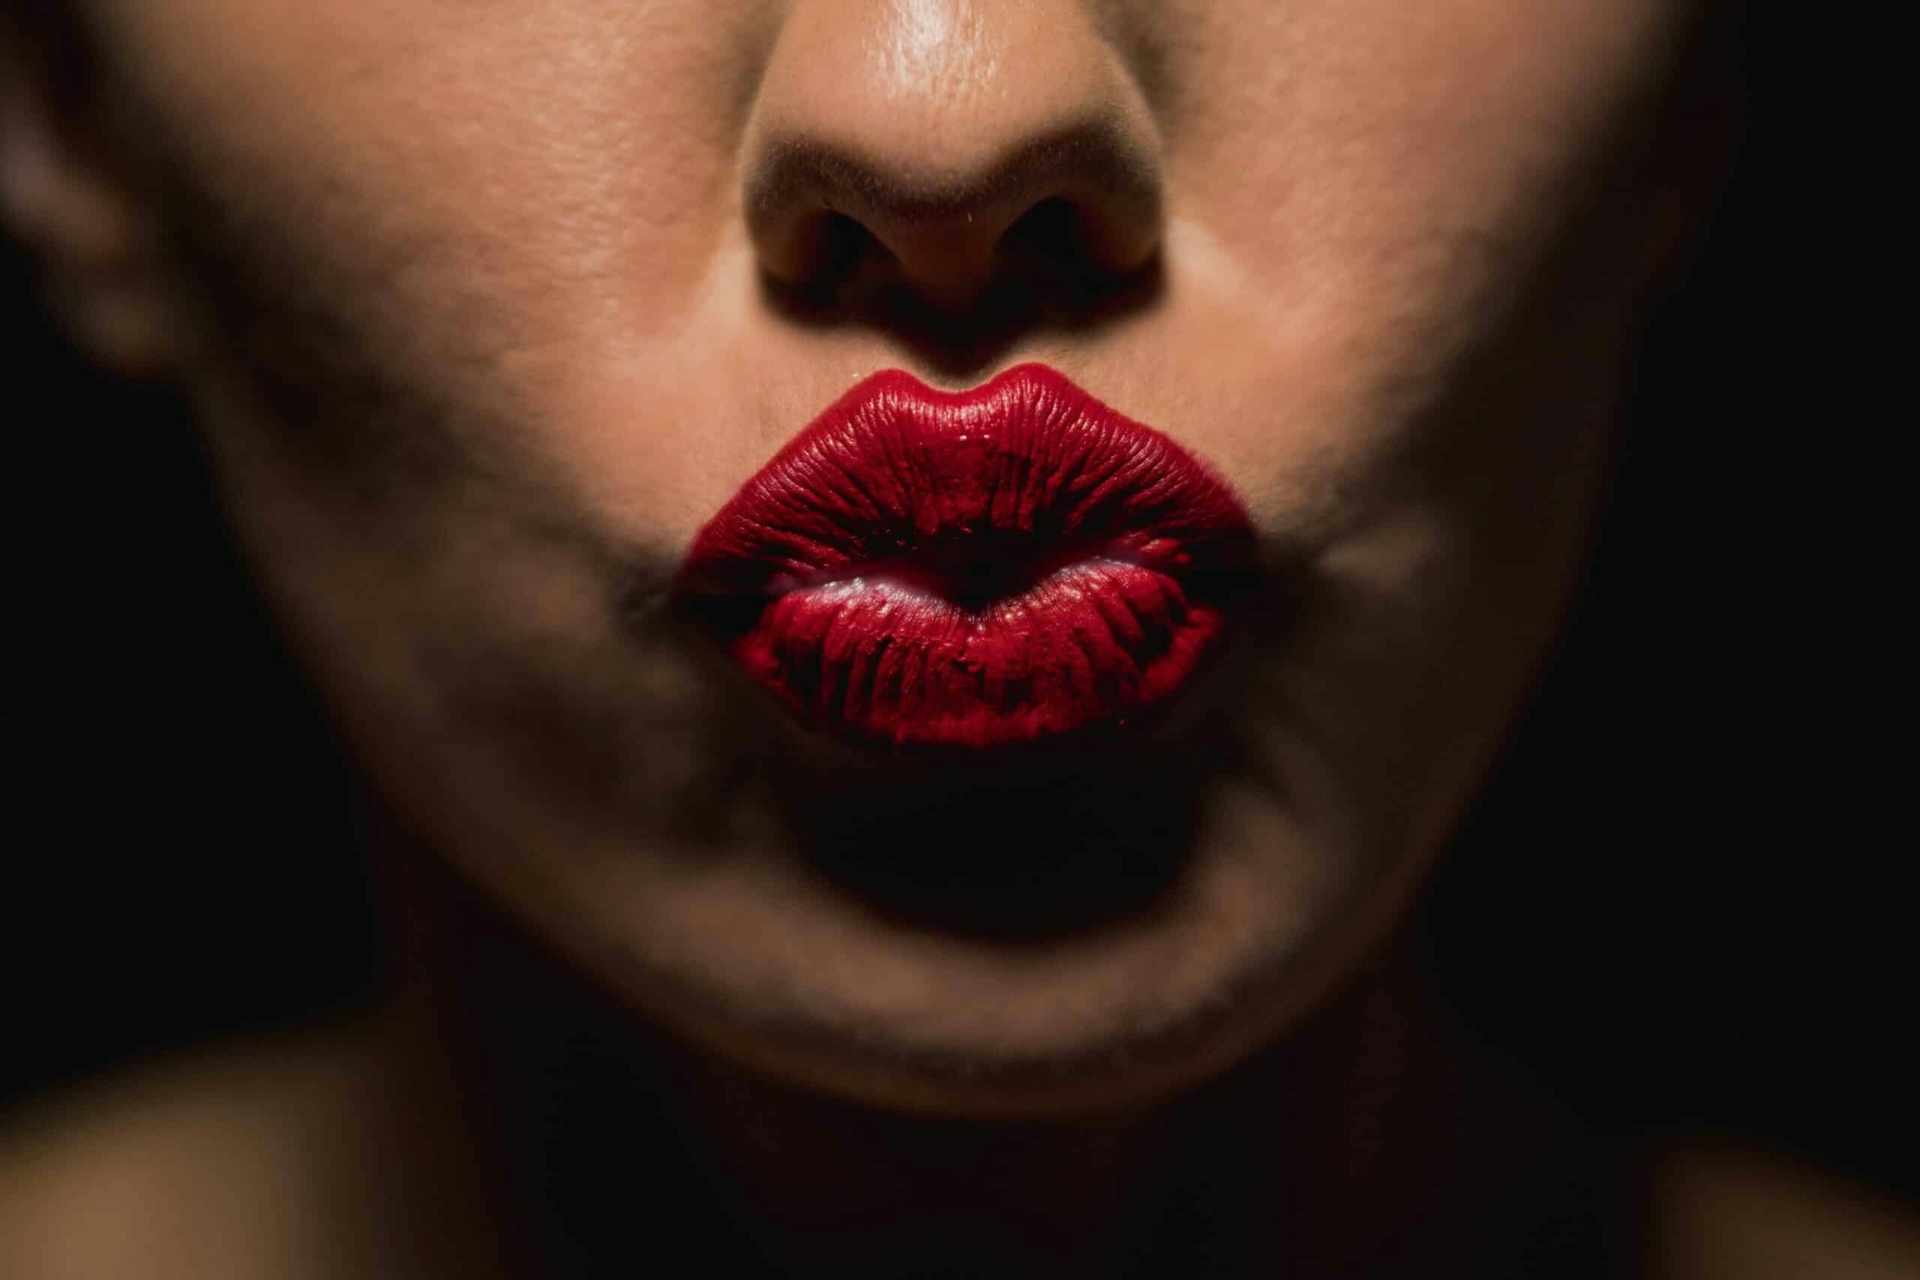 Lip Augmentation Explained: Techniques for Fuller and More Defined Lips